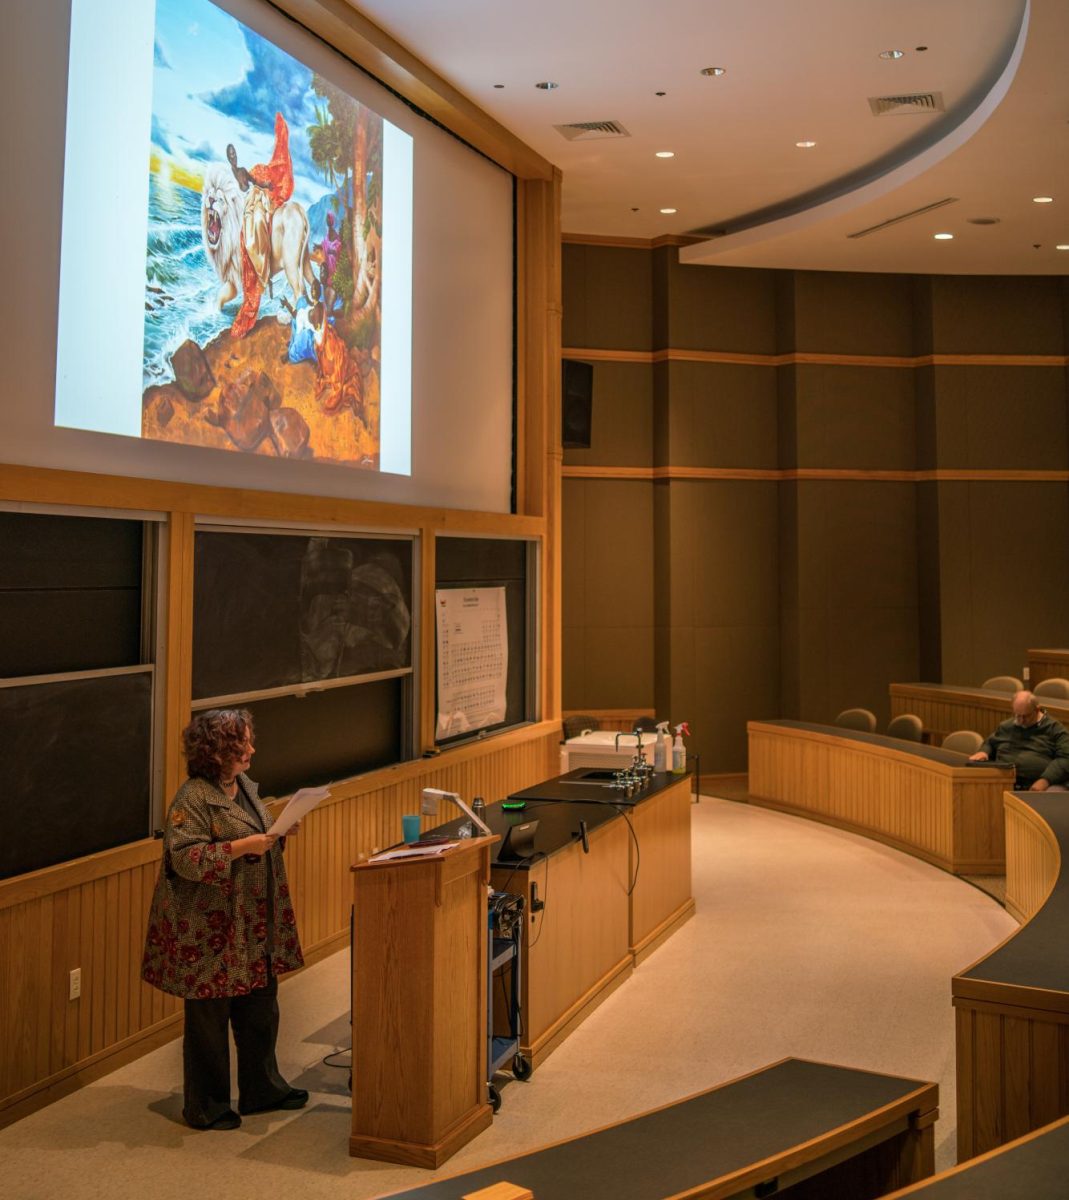 Helen Morales delivers a lecture on art and activism in Craig Hall.